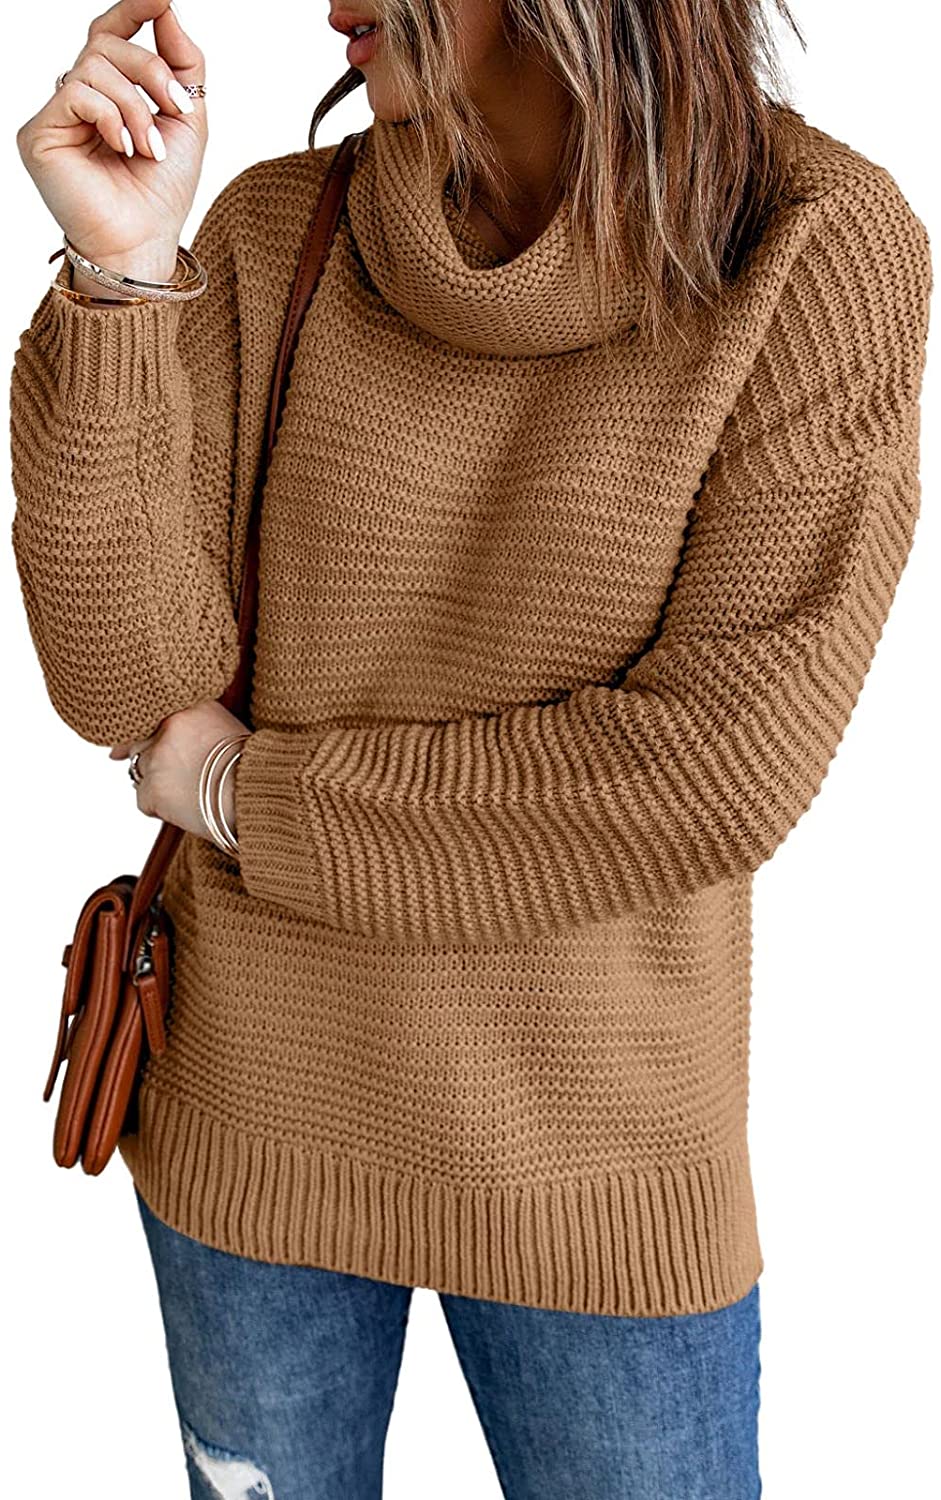 ZKESS Women Casual Loose Baggy Fit Turtle Neck Sweater Pullover